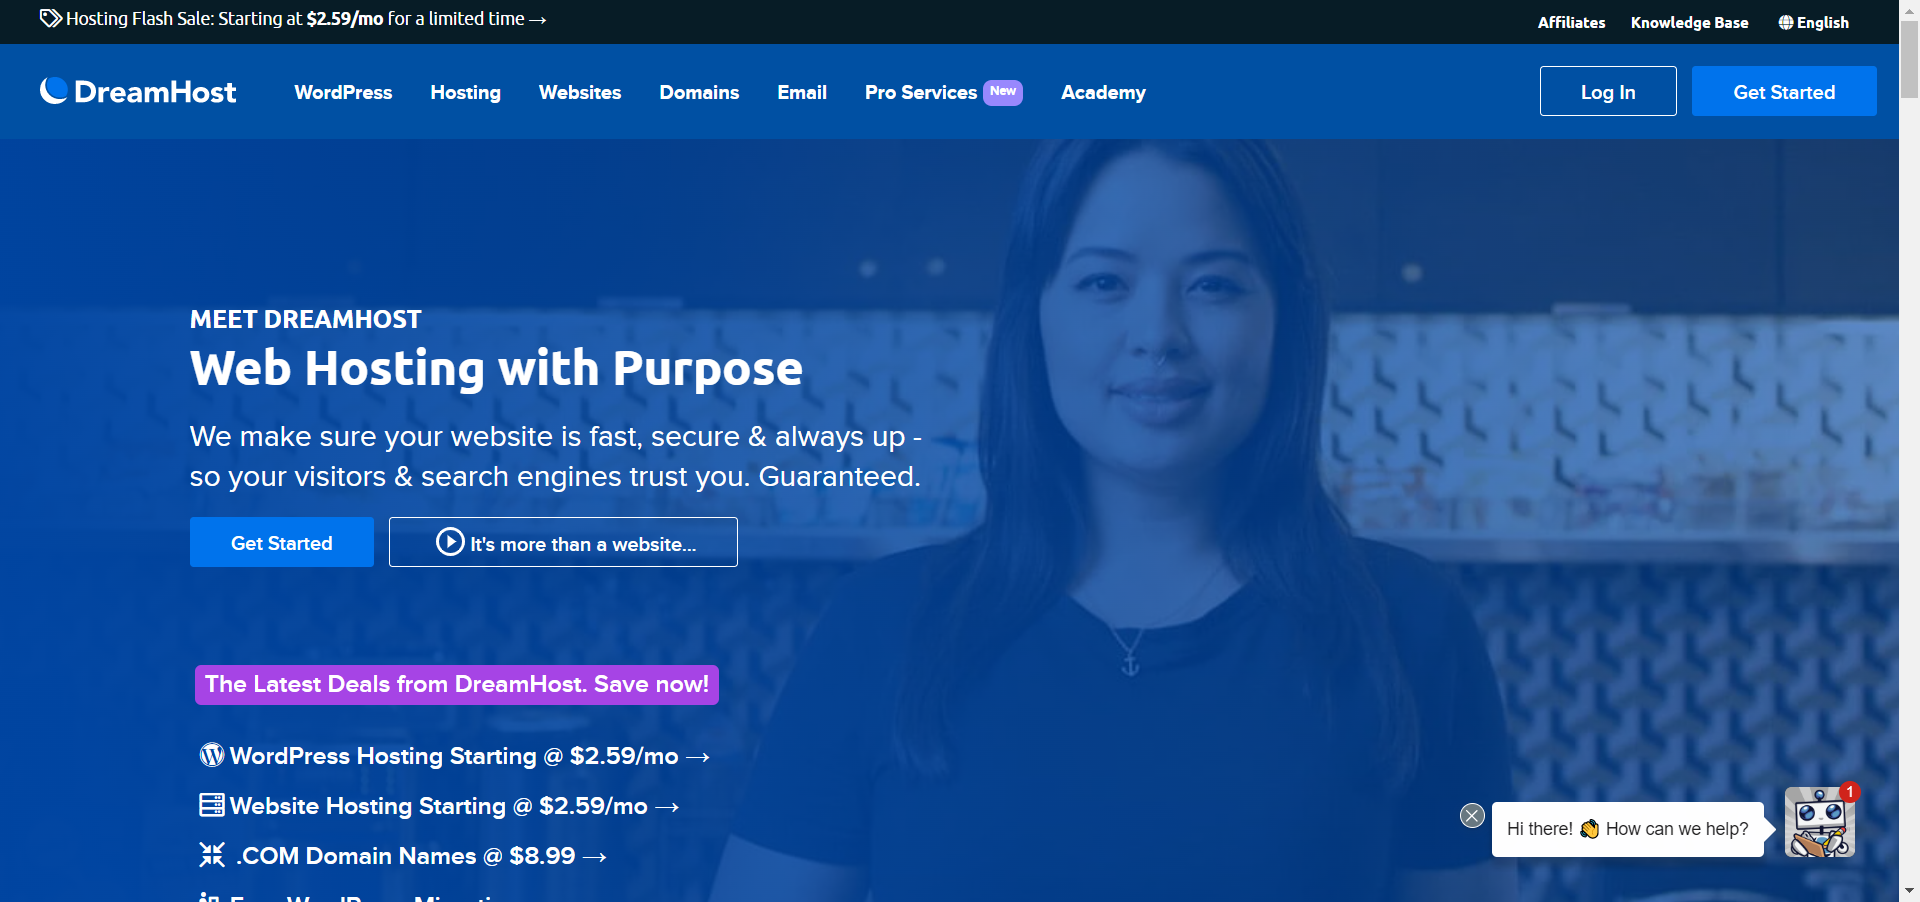 DreamHost main page